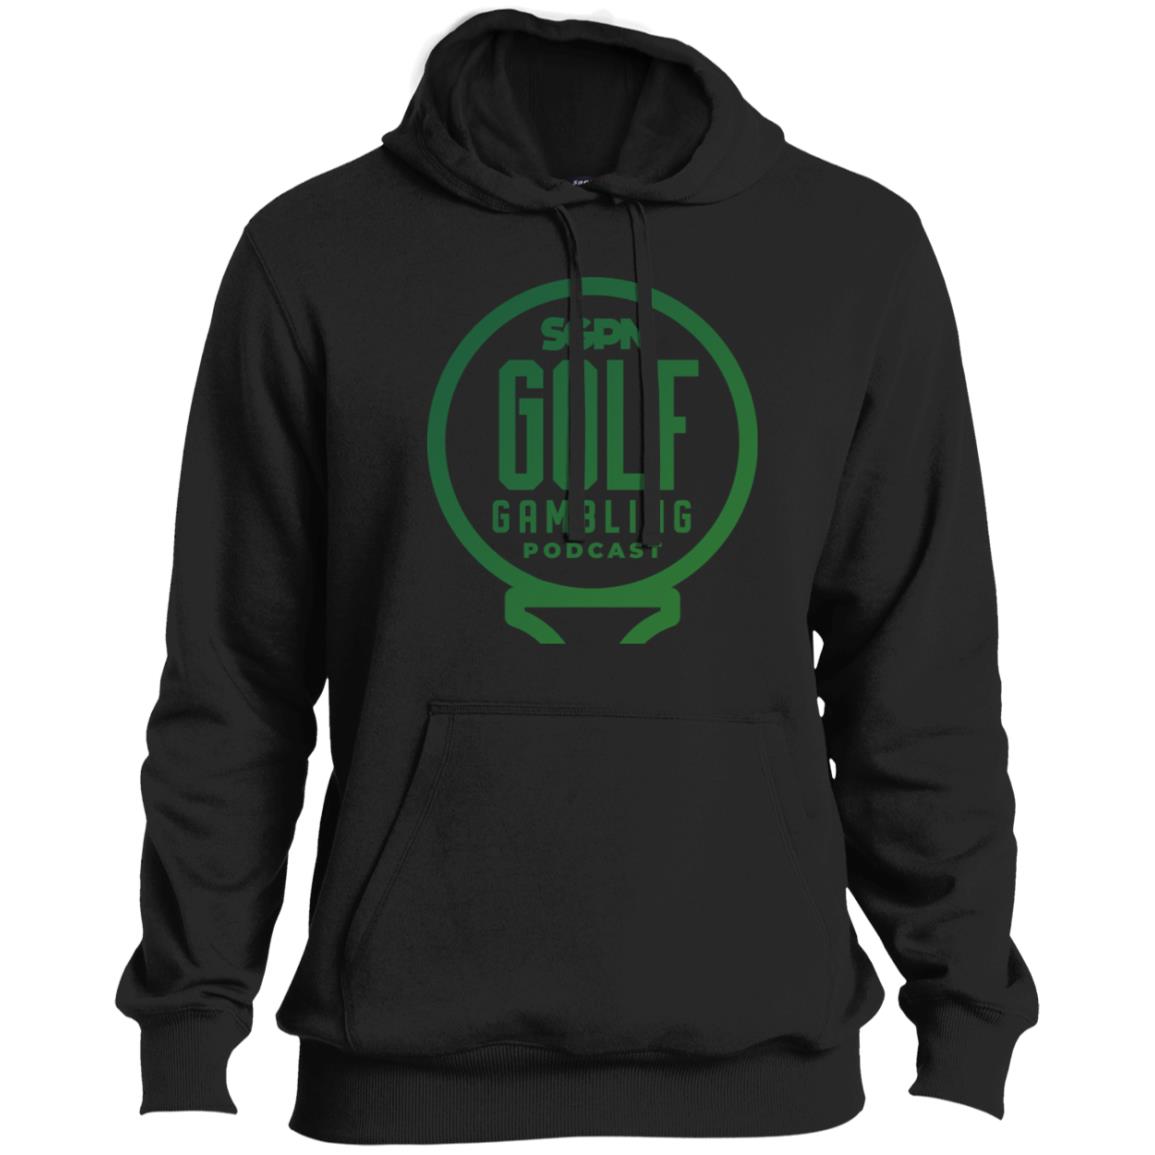 Golf Gambling Podcast Pullover Hoodie (Color Logo)